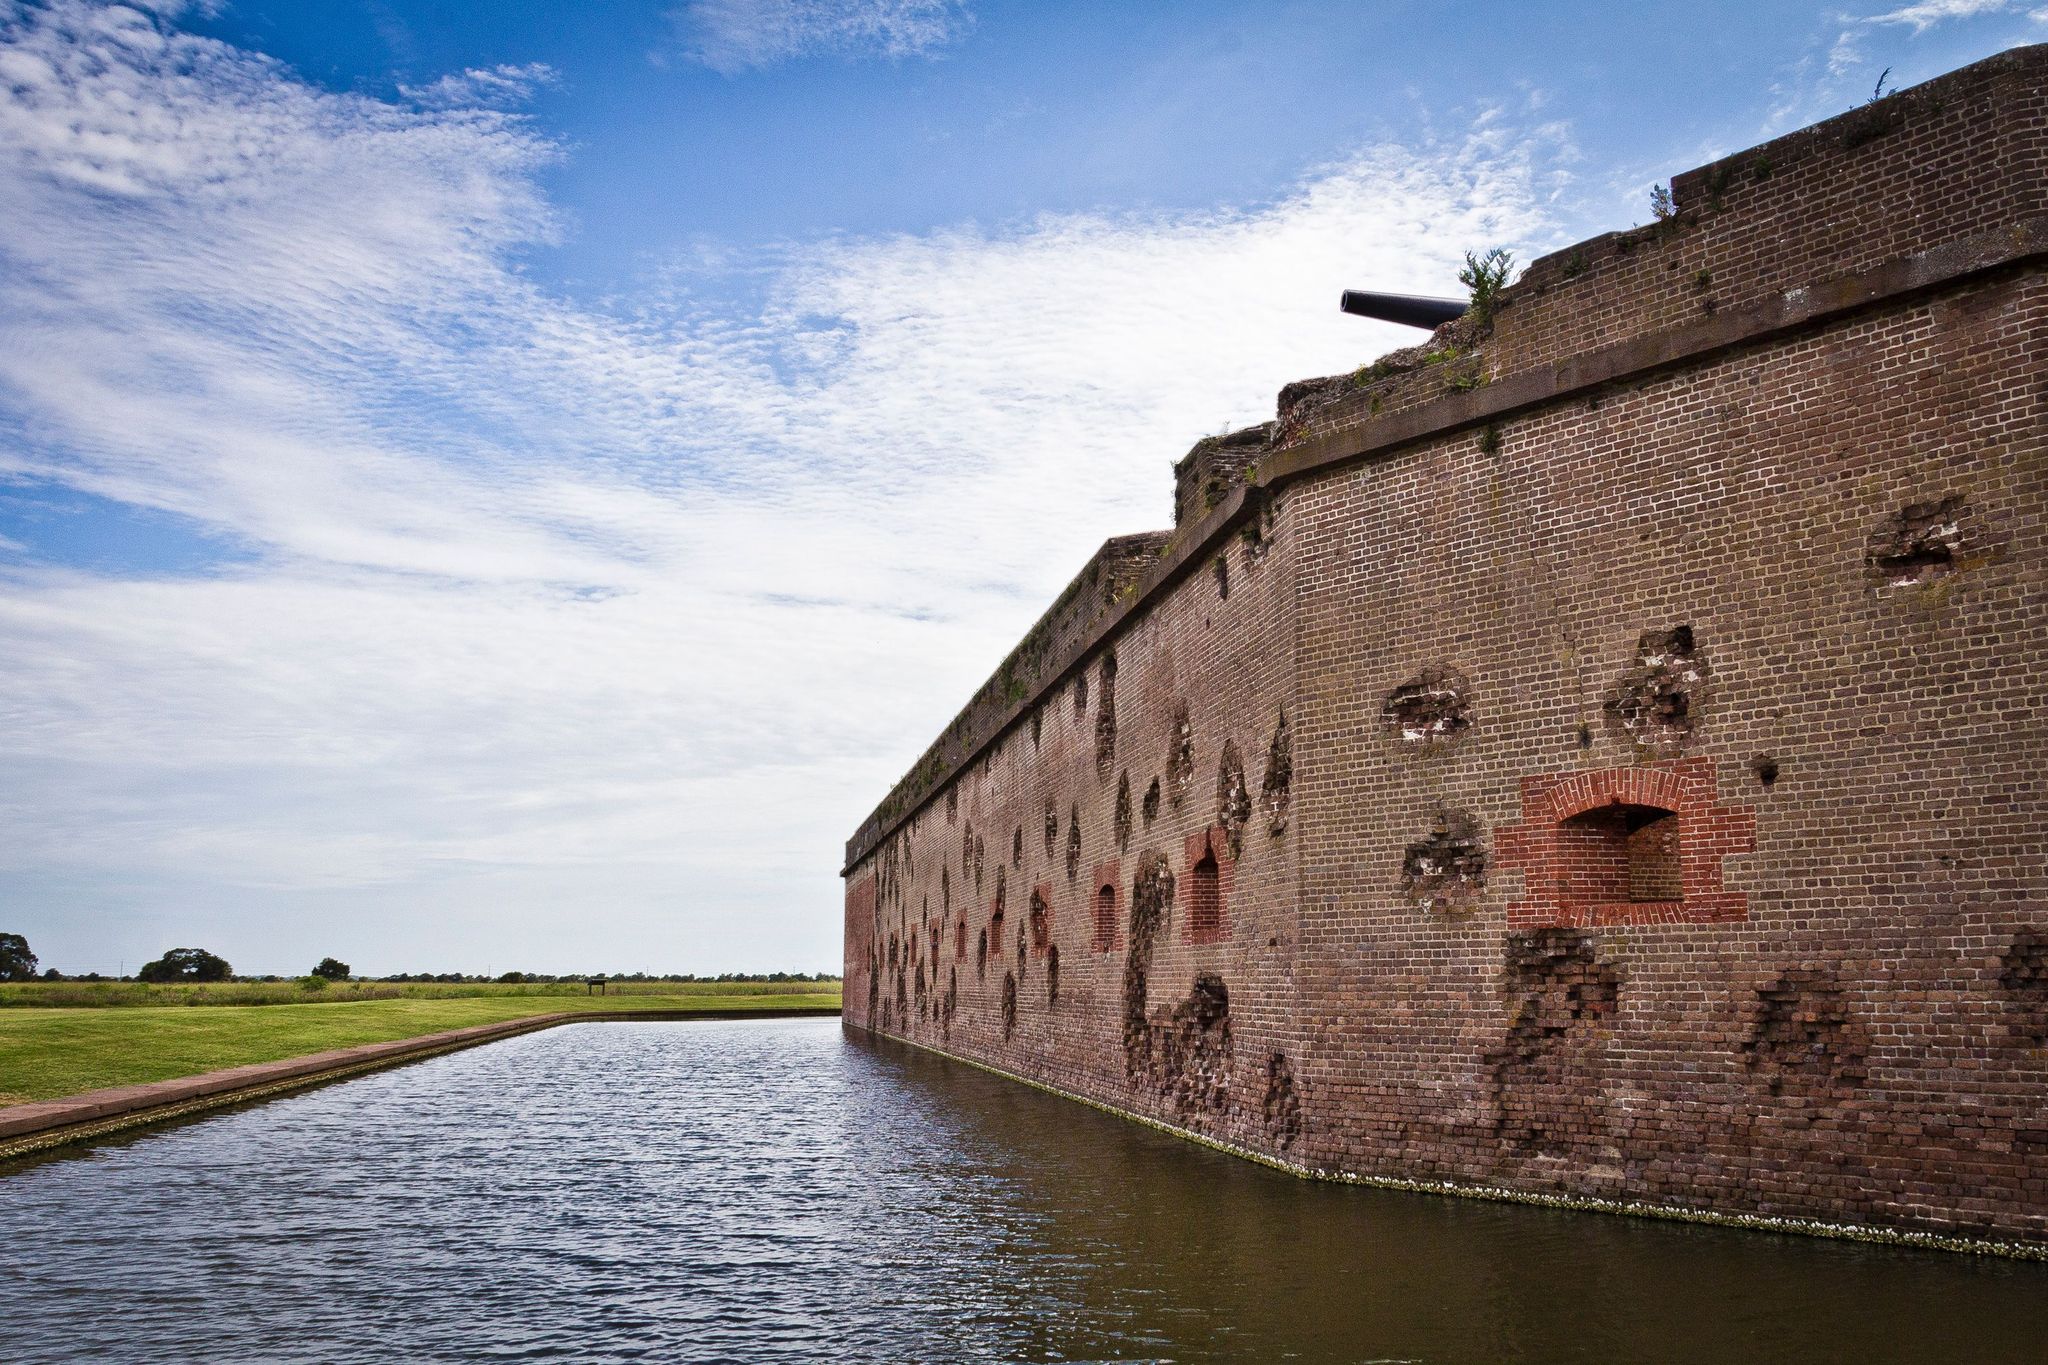 A walk along the outside of Fort Pulaski reveals damaged walls over 150 years after the Civil War.